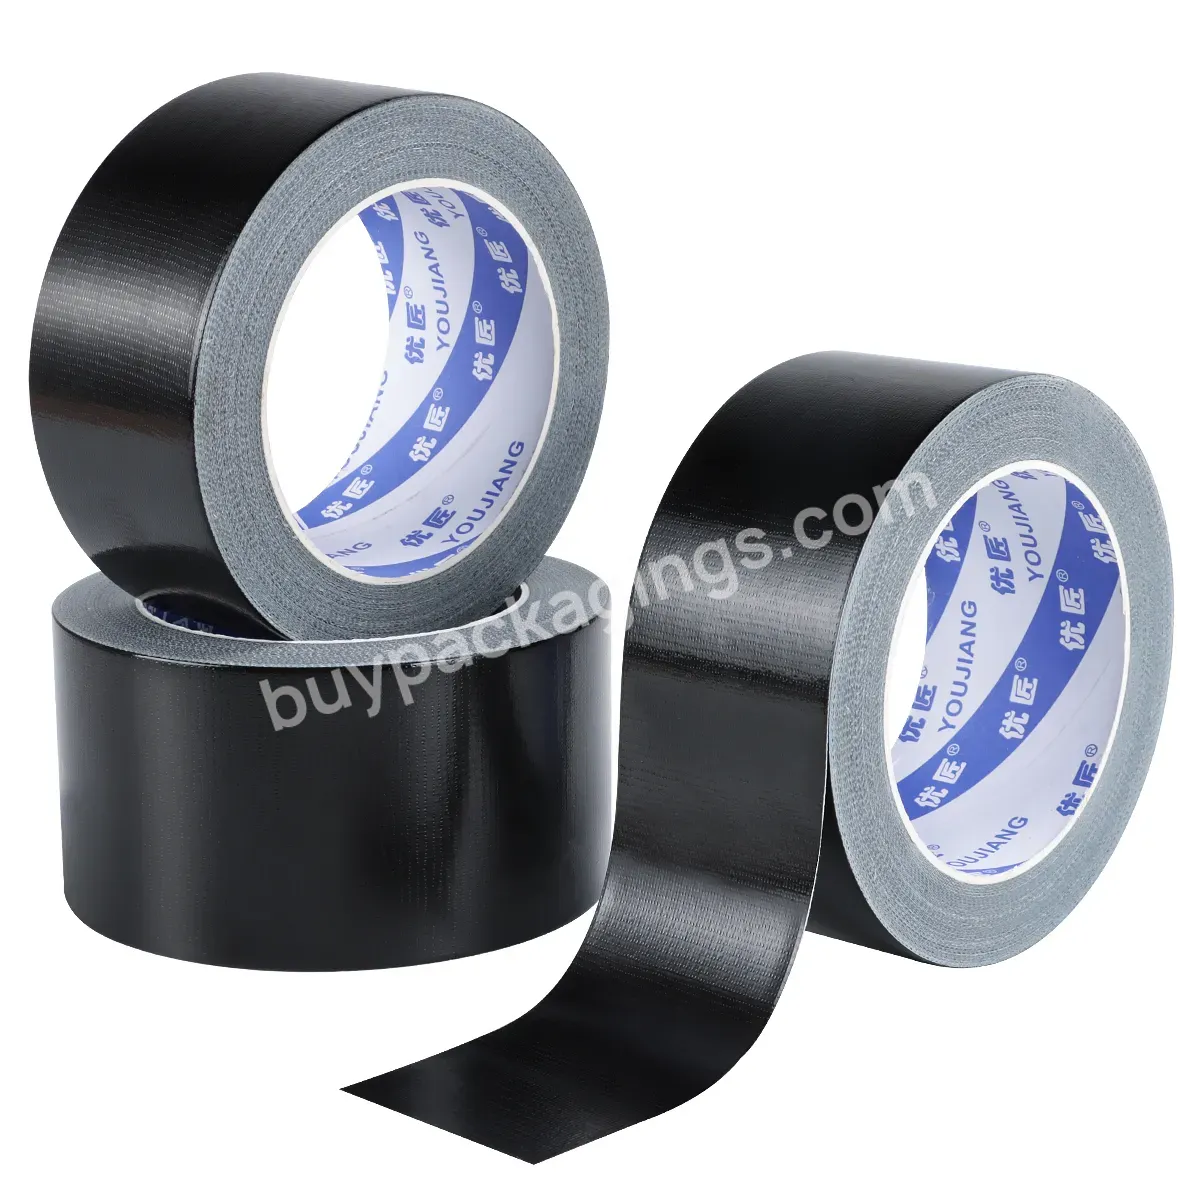 You Jiang Nature Rubber Glue Best Quality Strong Adhesive Custom Size Fabric Cloth Duct Tape - Buy Tuck Tape,Adhesive For Tuck Tape,Tape Tuck.